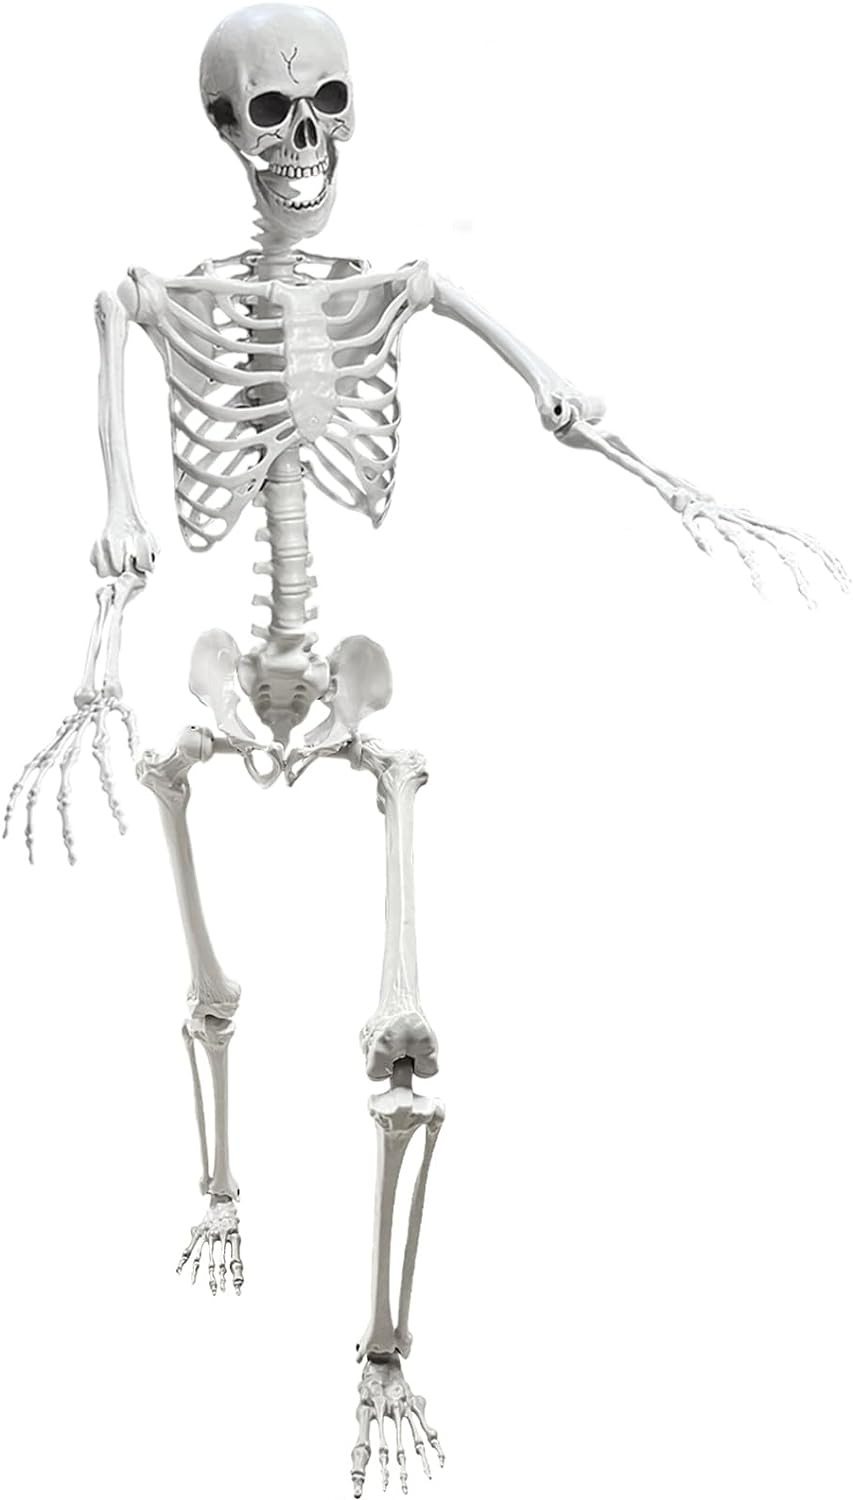 5.4Ft Posable Life Size Human Adult Skeletons Plastic Human Bones with Movable J